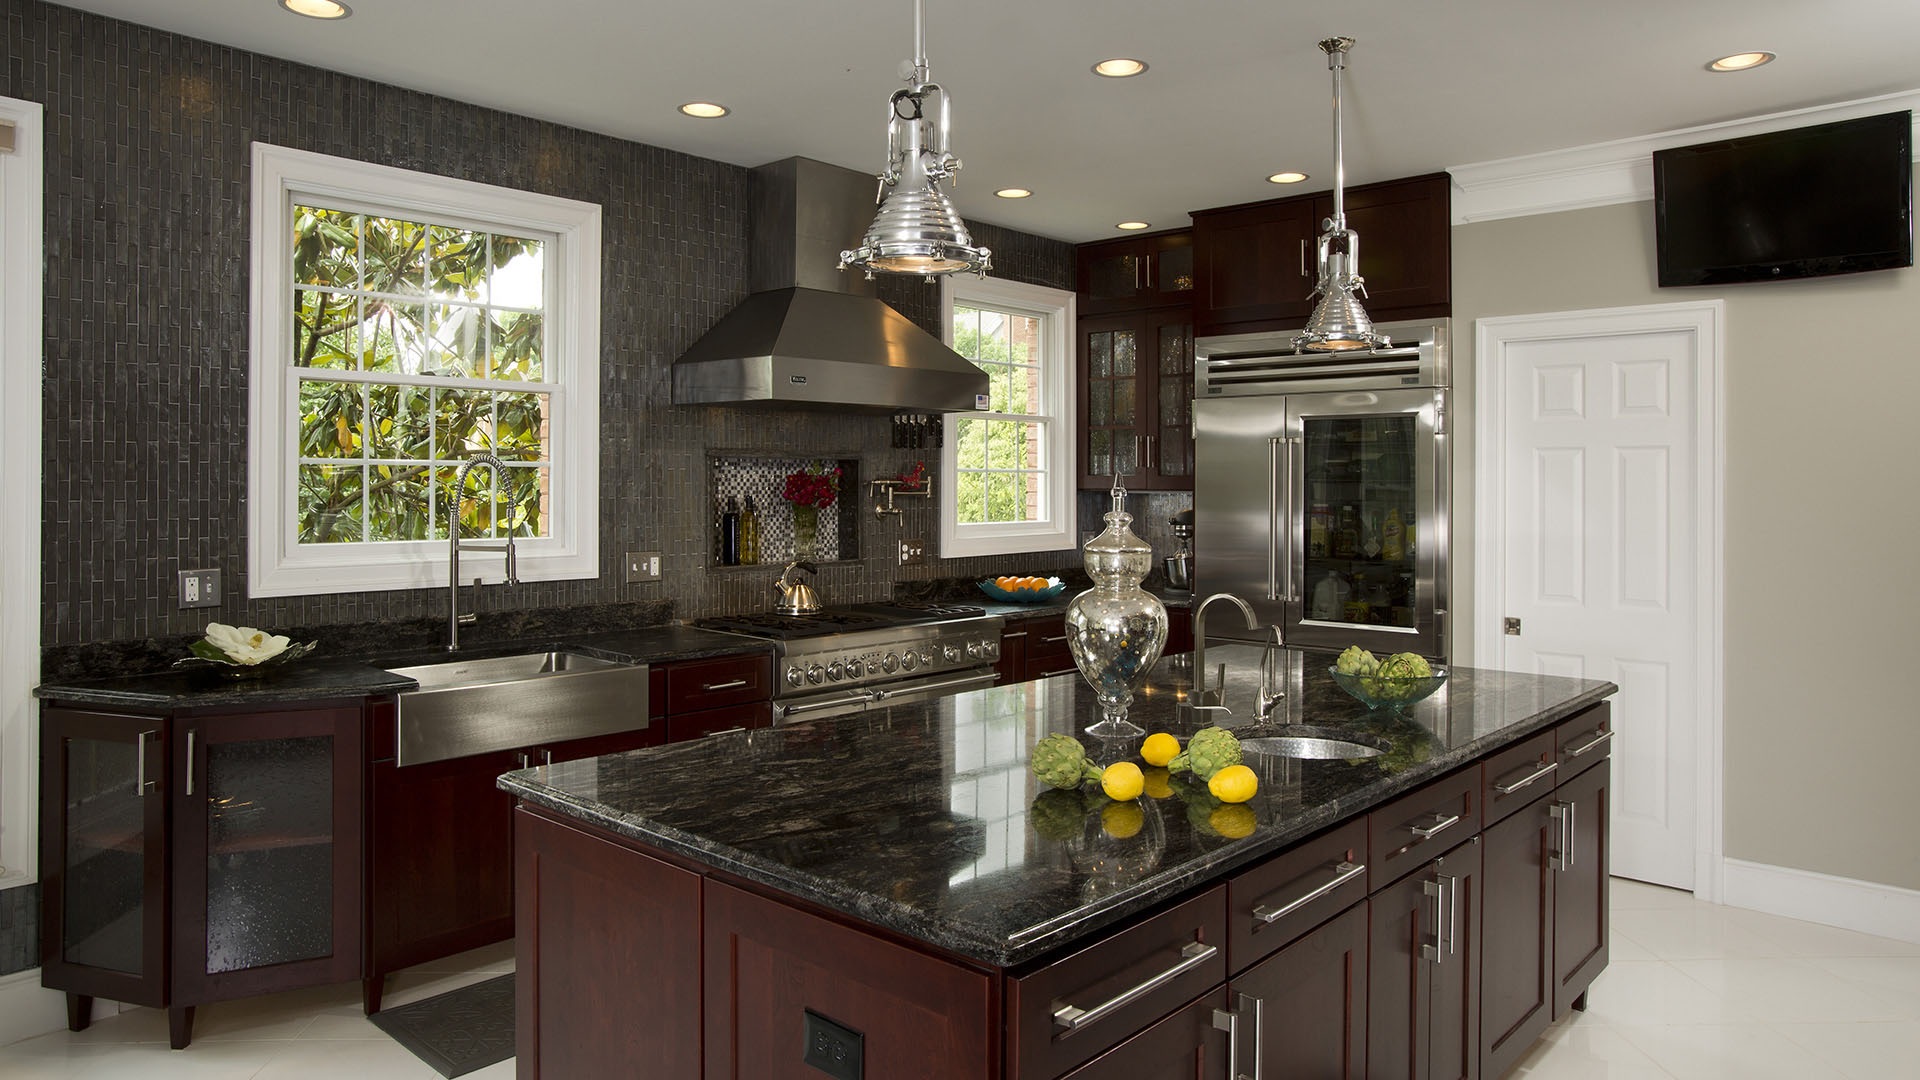 NARI Capital CotY, Honorable Mention Award Winner, Residential Kitchen $50,000 to $100,000